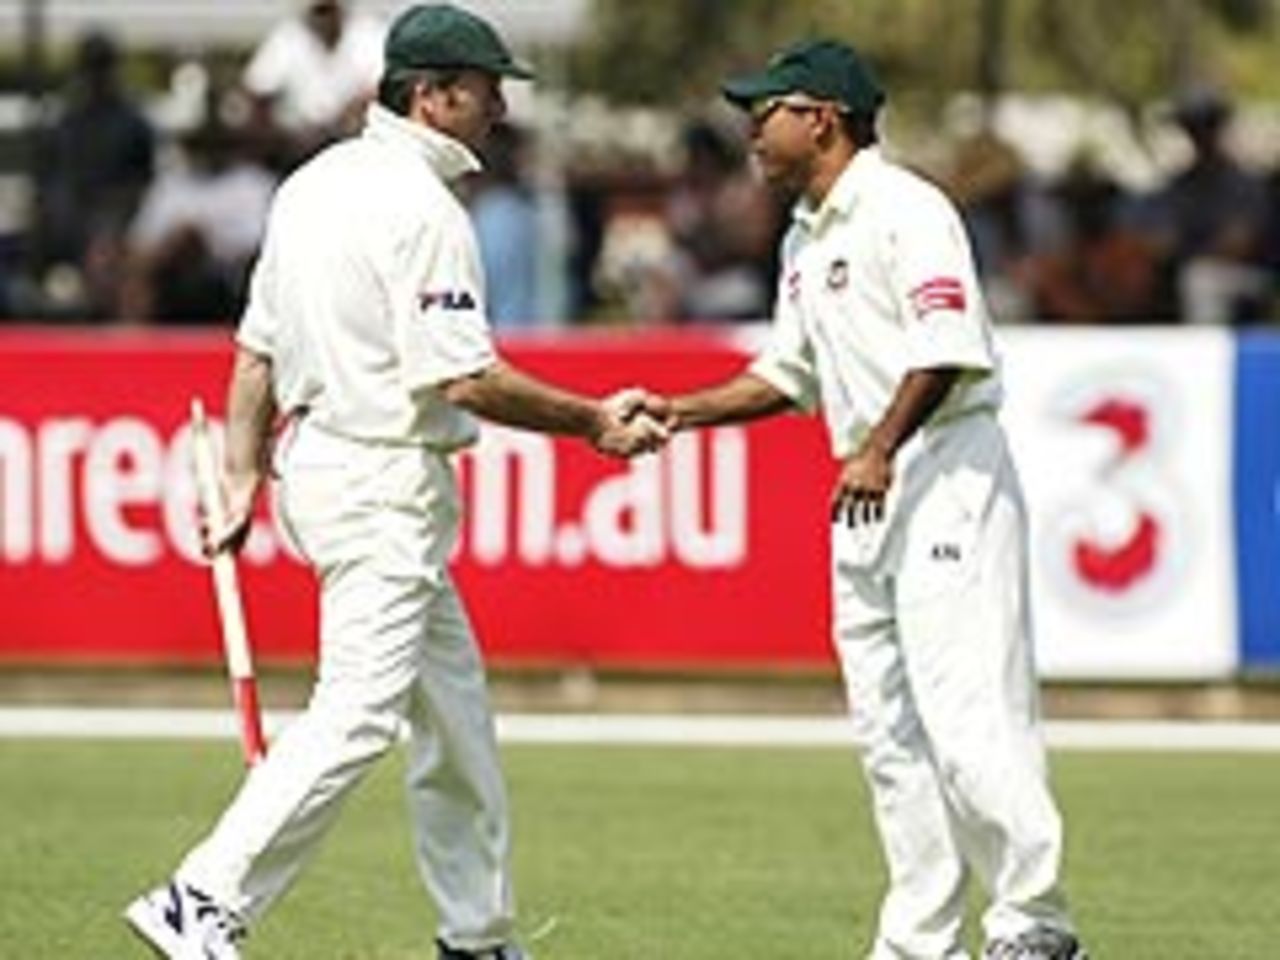 Steve Waugh and Khaled Mahmud shake hands after Australia beat Bangladesh in the first Test at Darwin